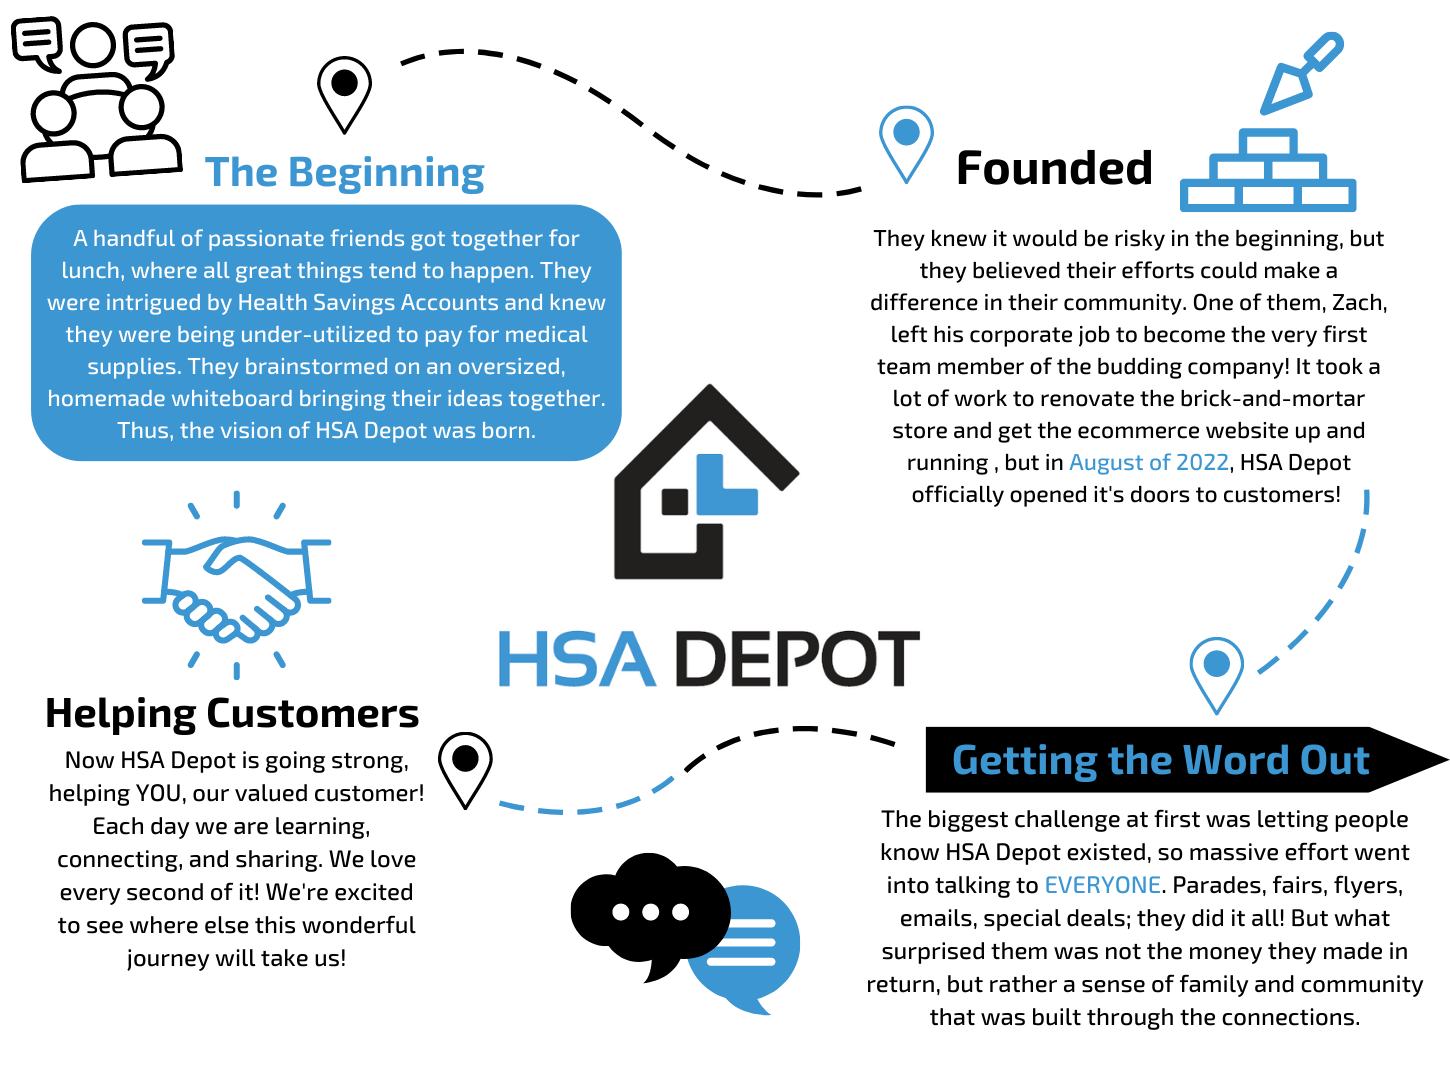 A roadmap of the HSA Depot story explaining that it started with a passionate group of friends getting together to find a way to better utilize health savings accounts, then they renovated the brick and mortar store, then they got the word out through talking to everyone and giving out lots of fliers at fairs and parades and such, and now they continue to help customers and absolutely love it! 